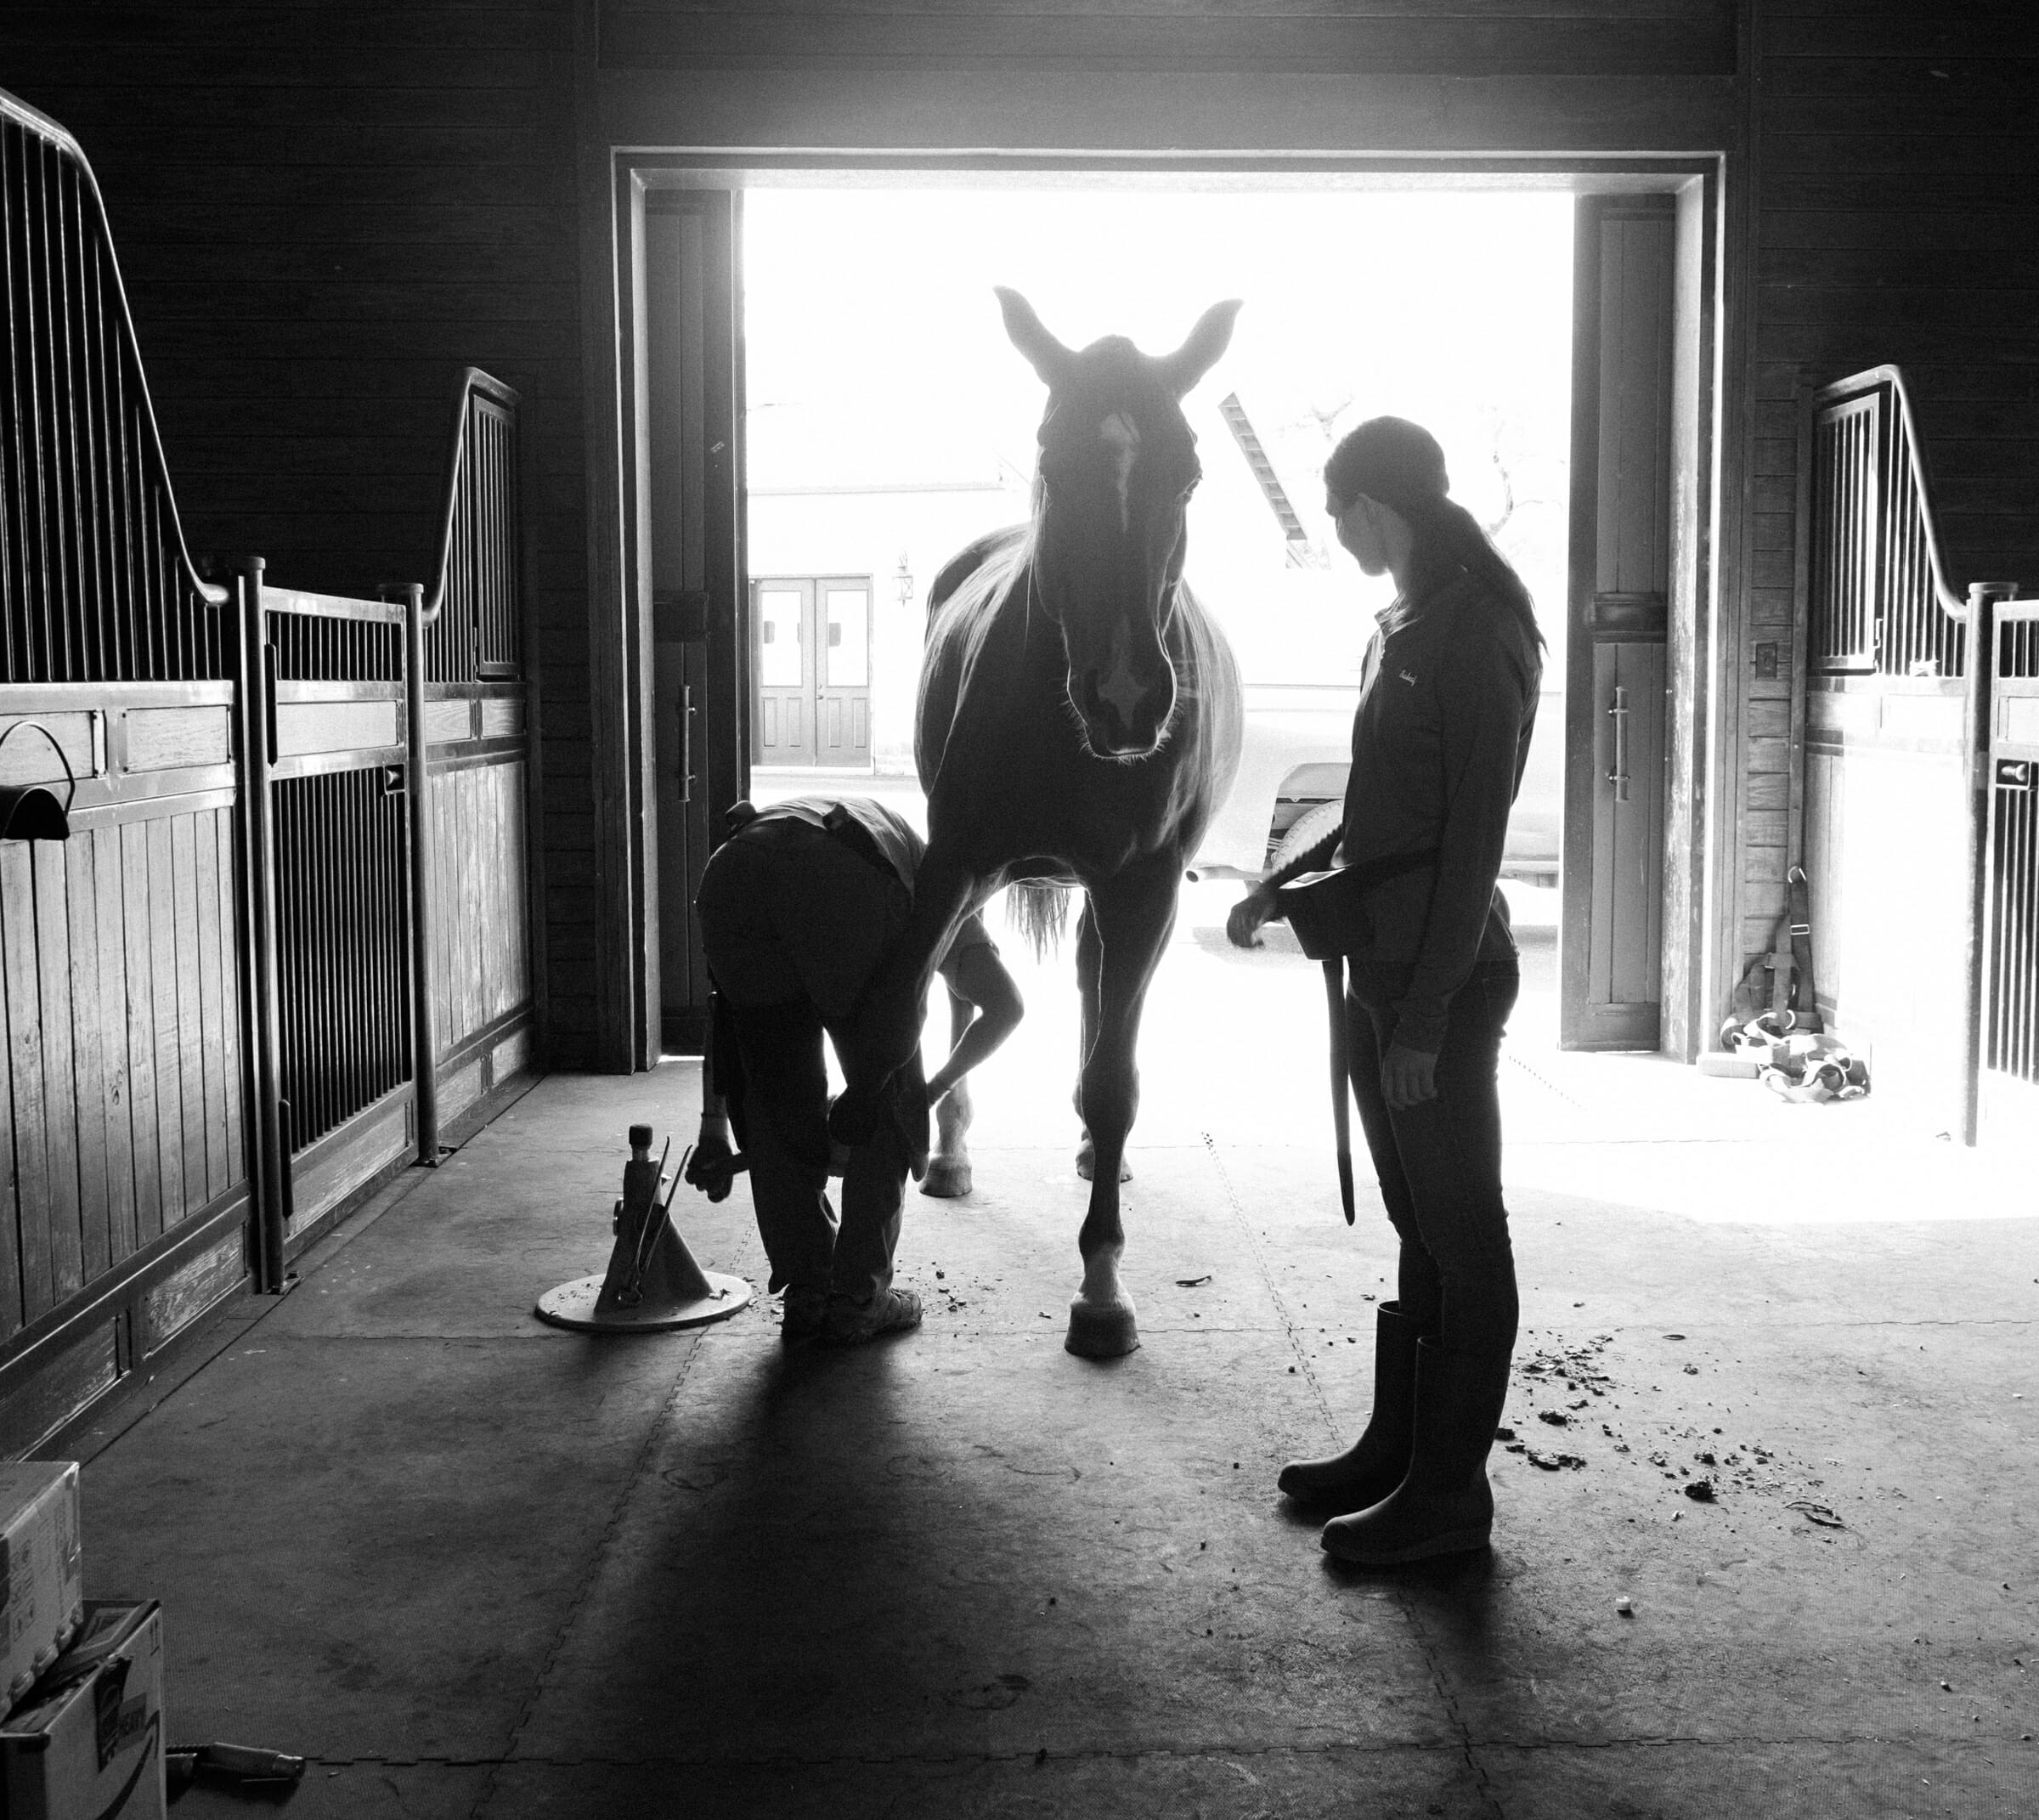 Choosing like minded professionals for your equine team